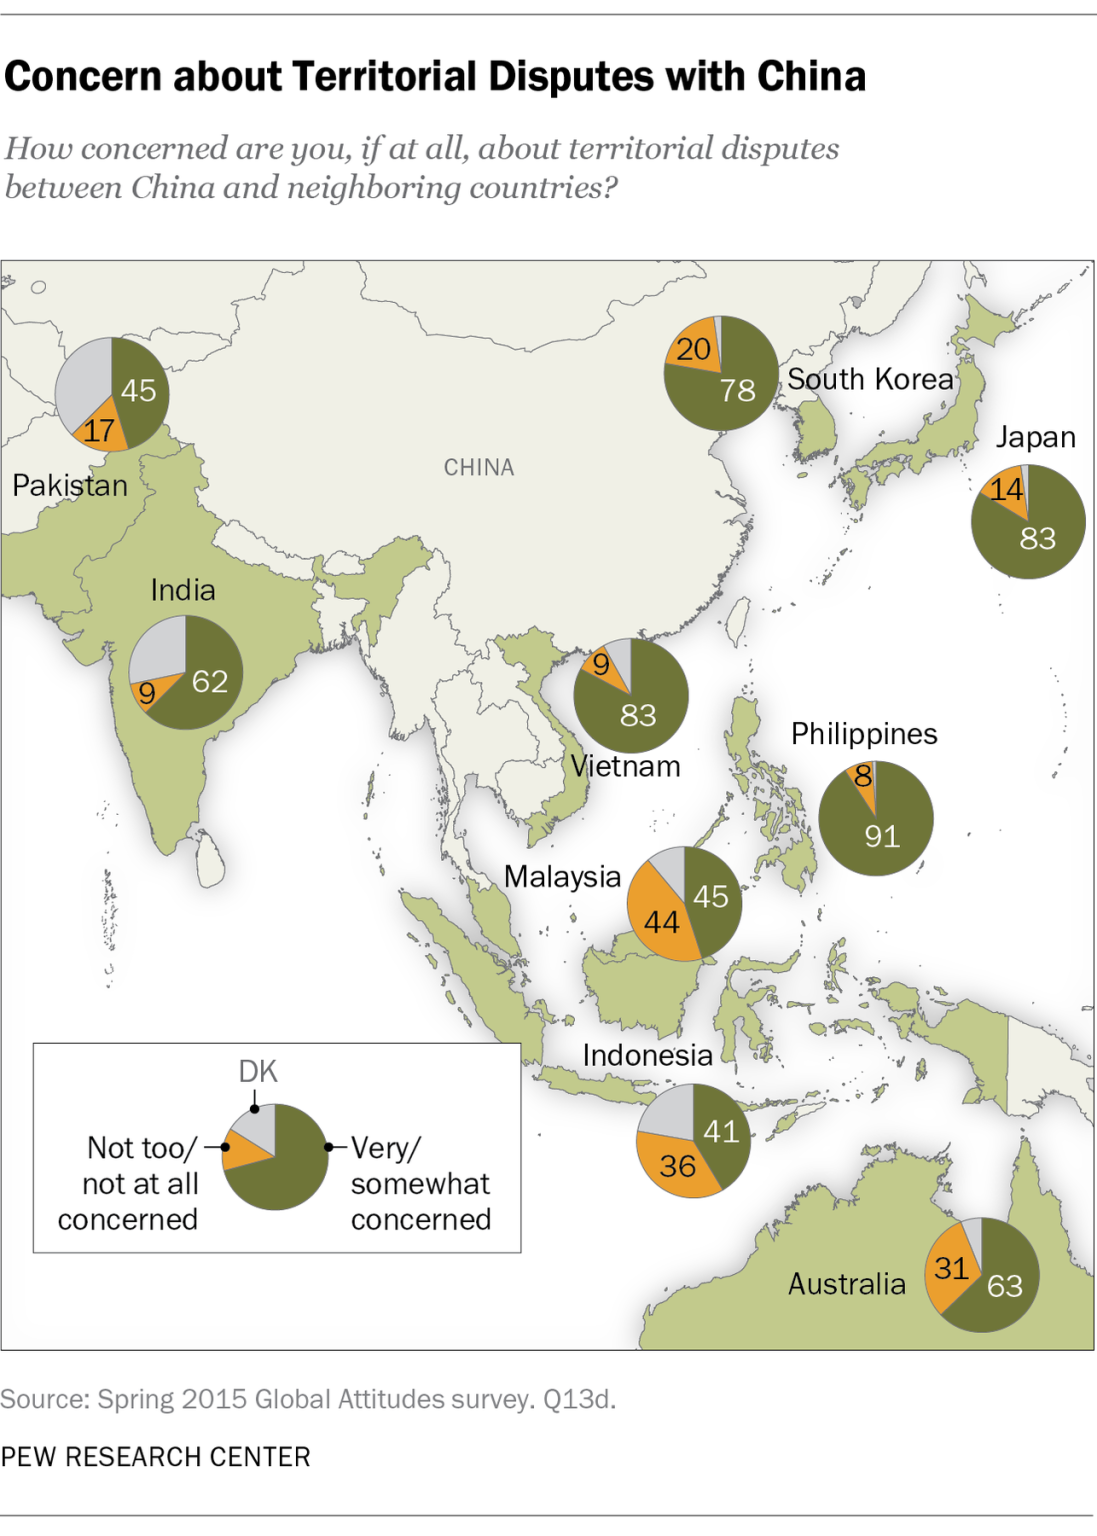 https://www.pewresearch.org/global/wp-content/uploads/sites/2/2015/09/Asia-Map.png?resize=1097,1536